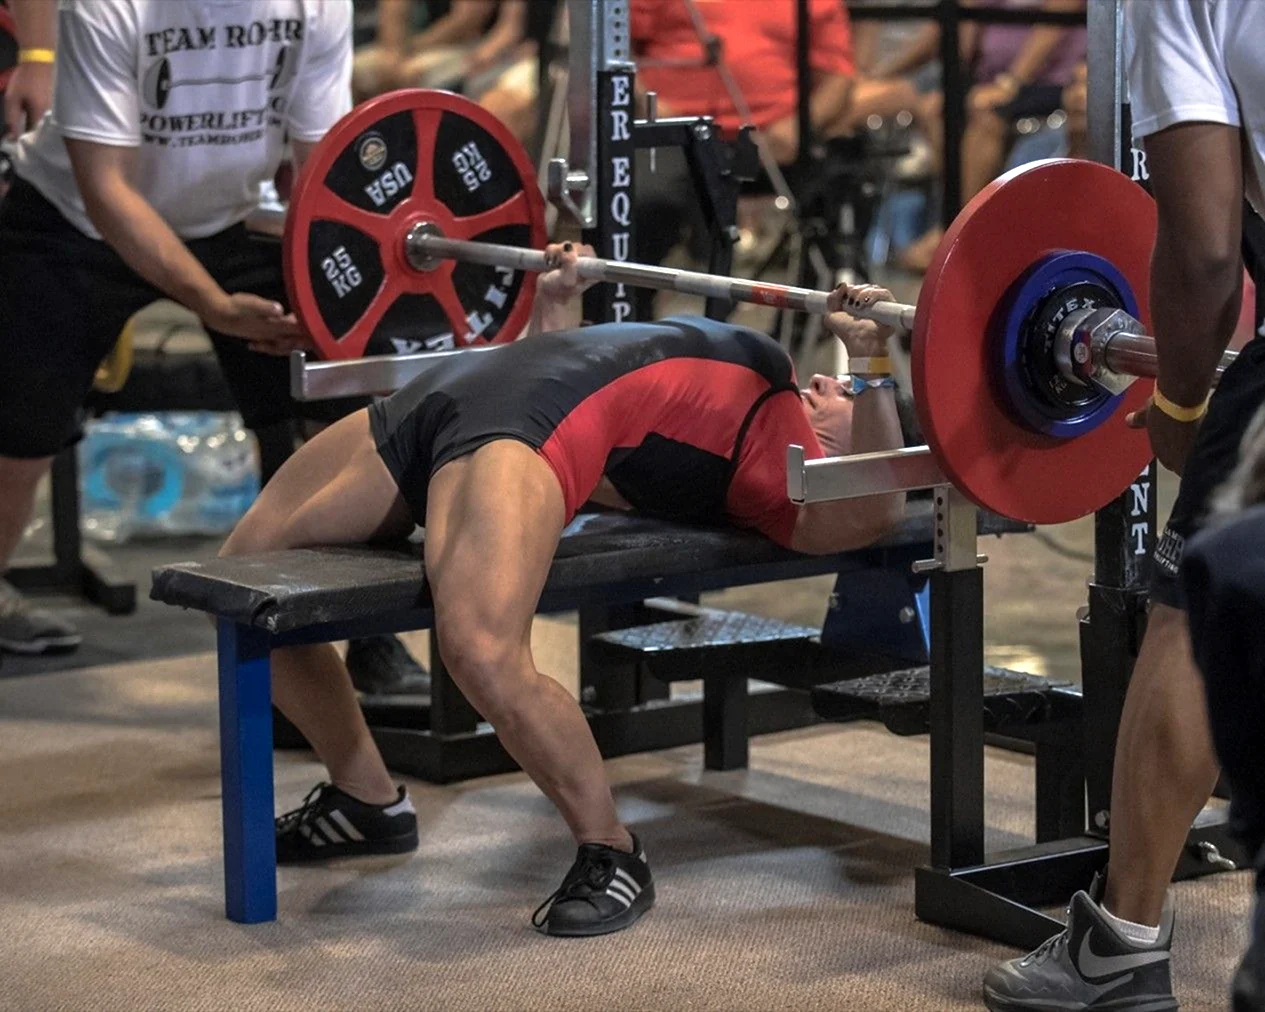 The Powerlifter Bench Presses